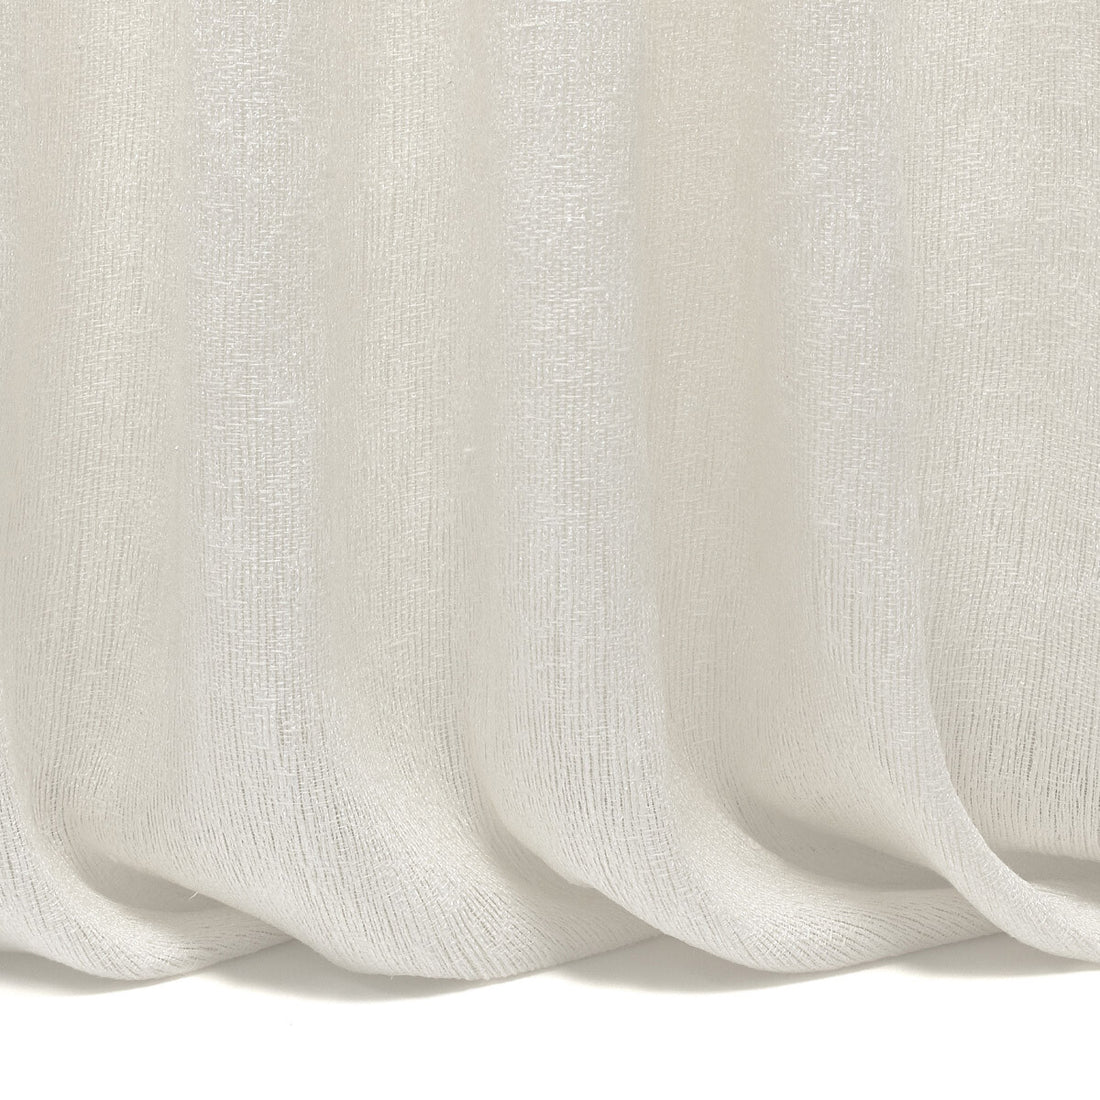 Namaste fabric in 7 color - pattern LZ-30334.07.0 - by Kravet Design in the Lizzo collection